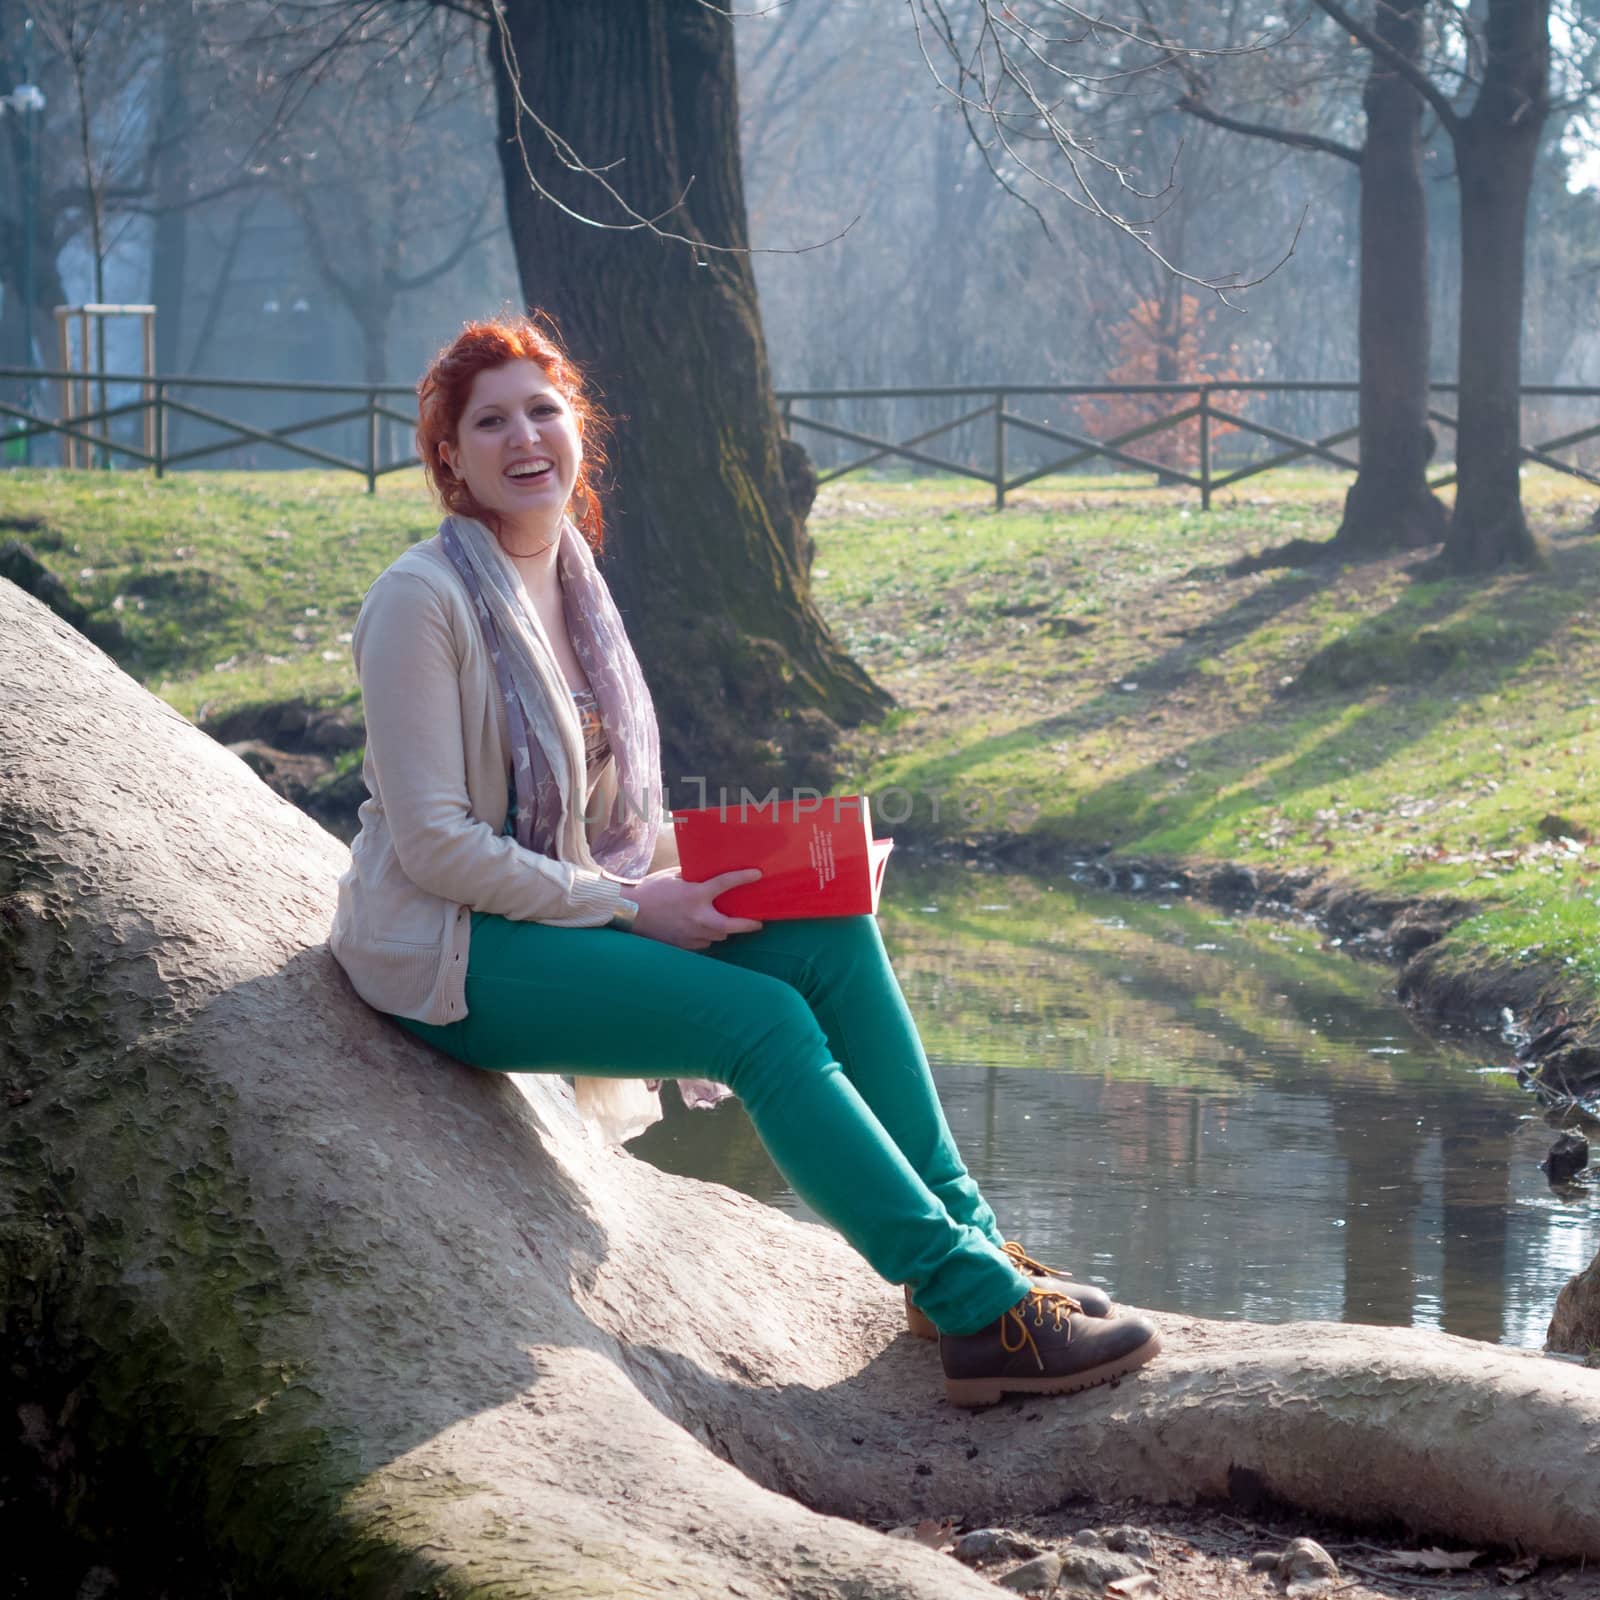 beautiful red head young woman reading book in the park